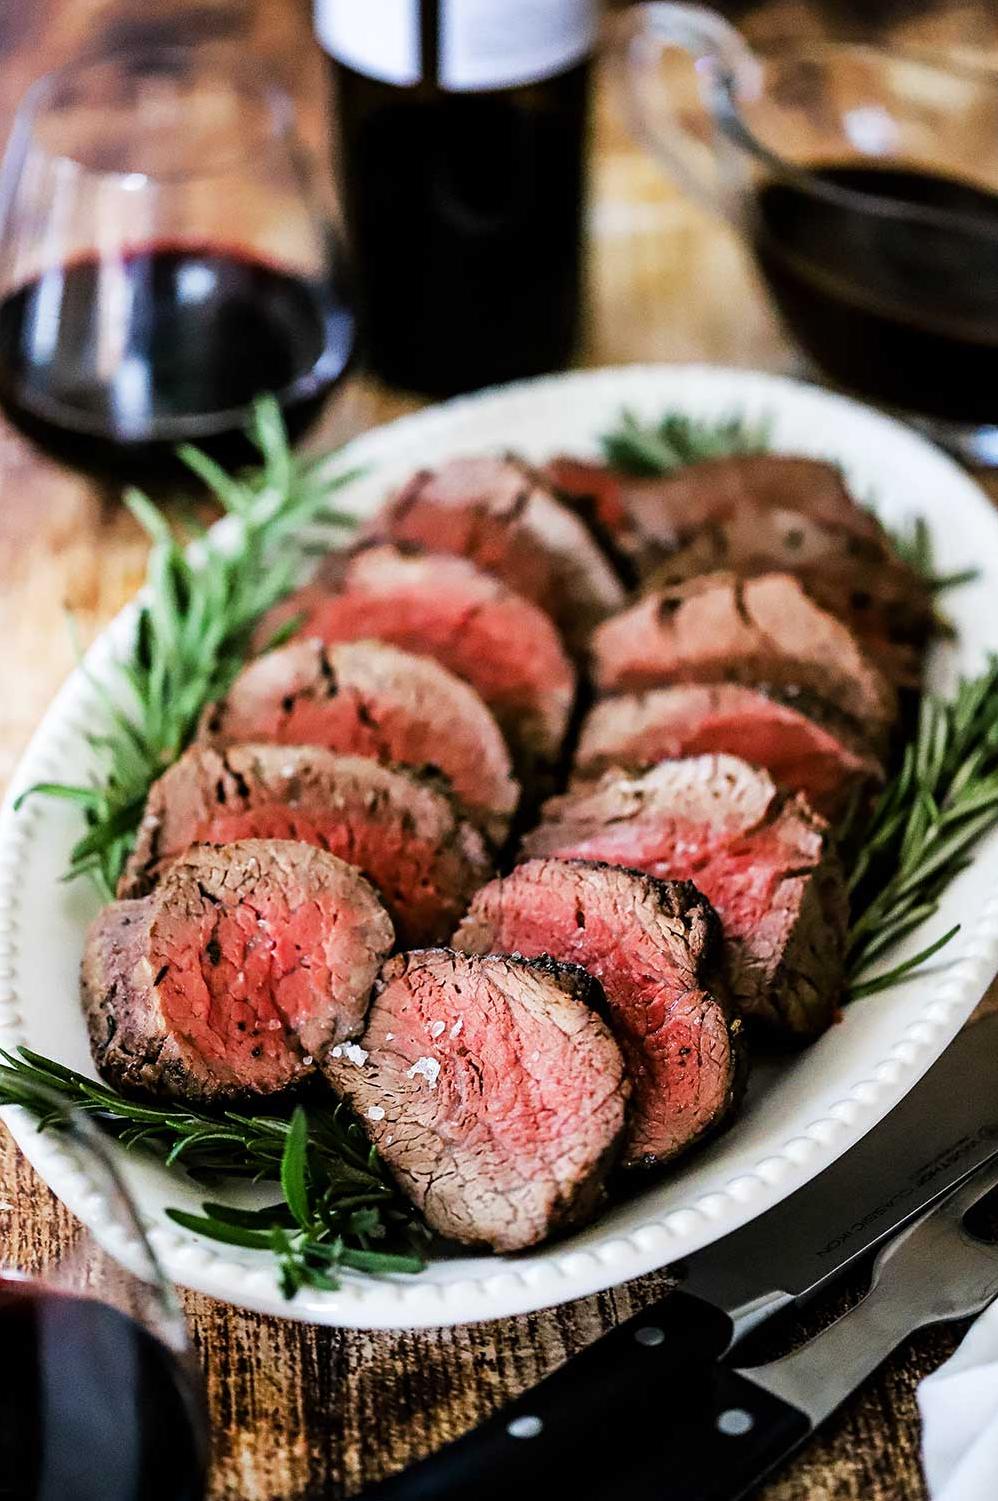  The caramelized crust on the outside of the beef tenderloin is the result of a high heat sear before roasting.